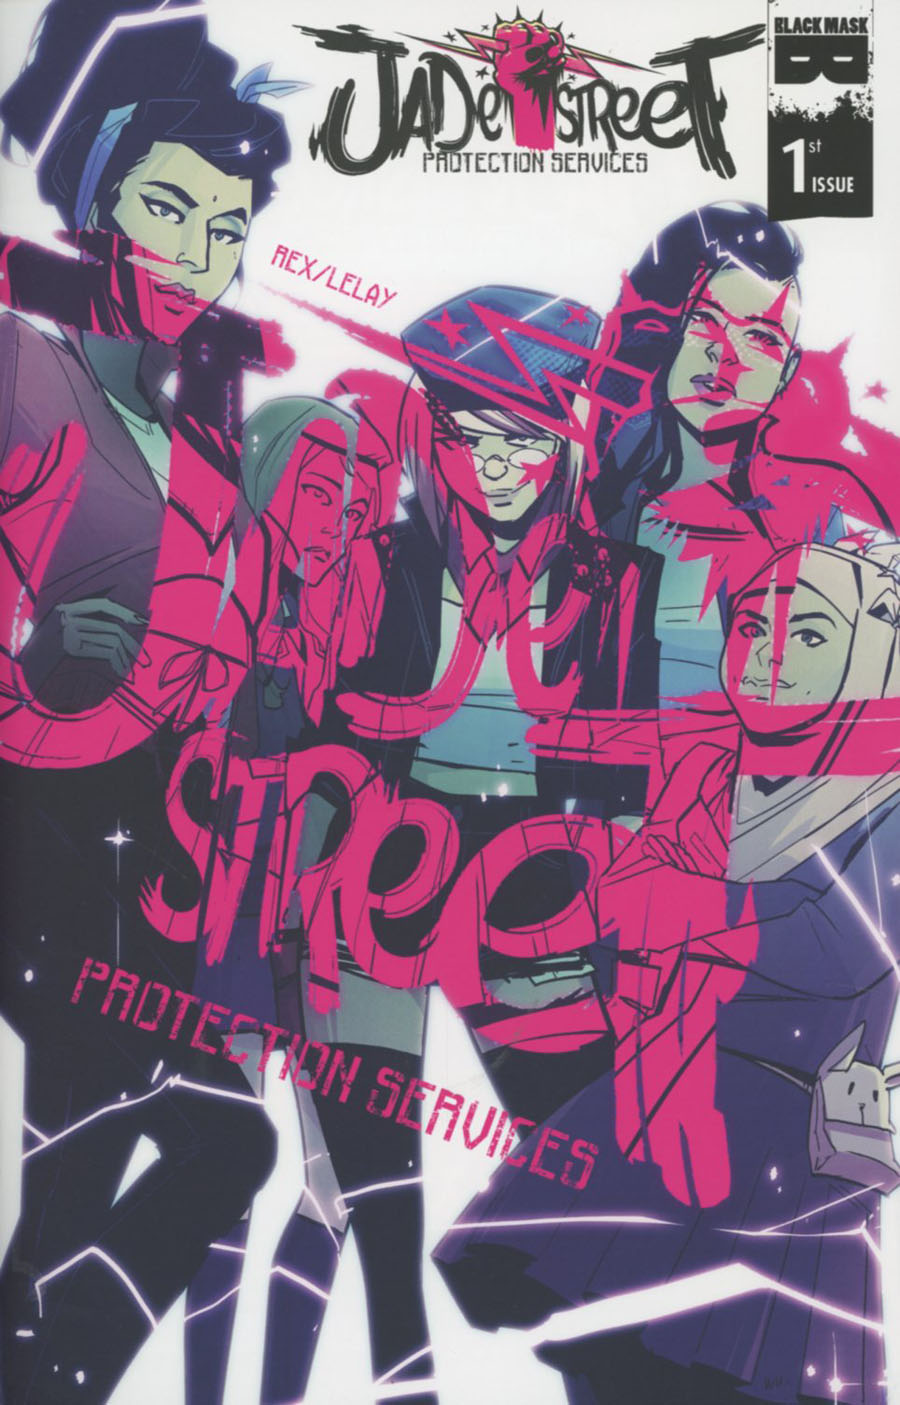 Jade Street Protection Services #1 Cover A 1st Ptg Annie Wu